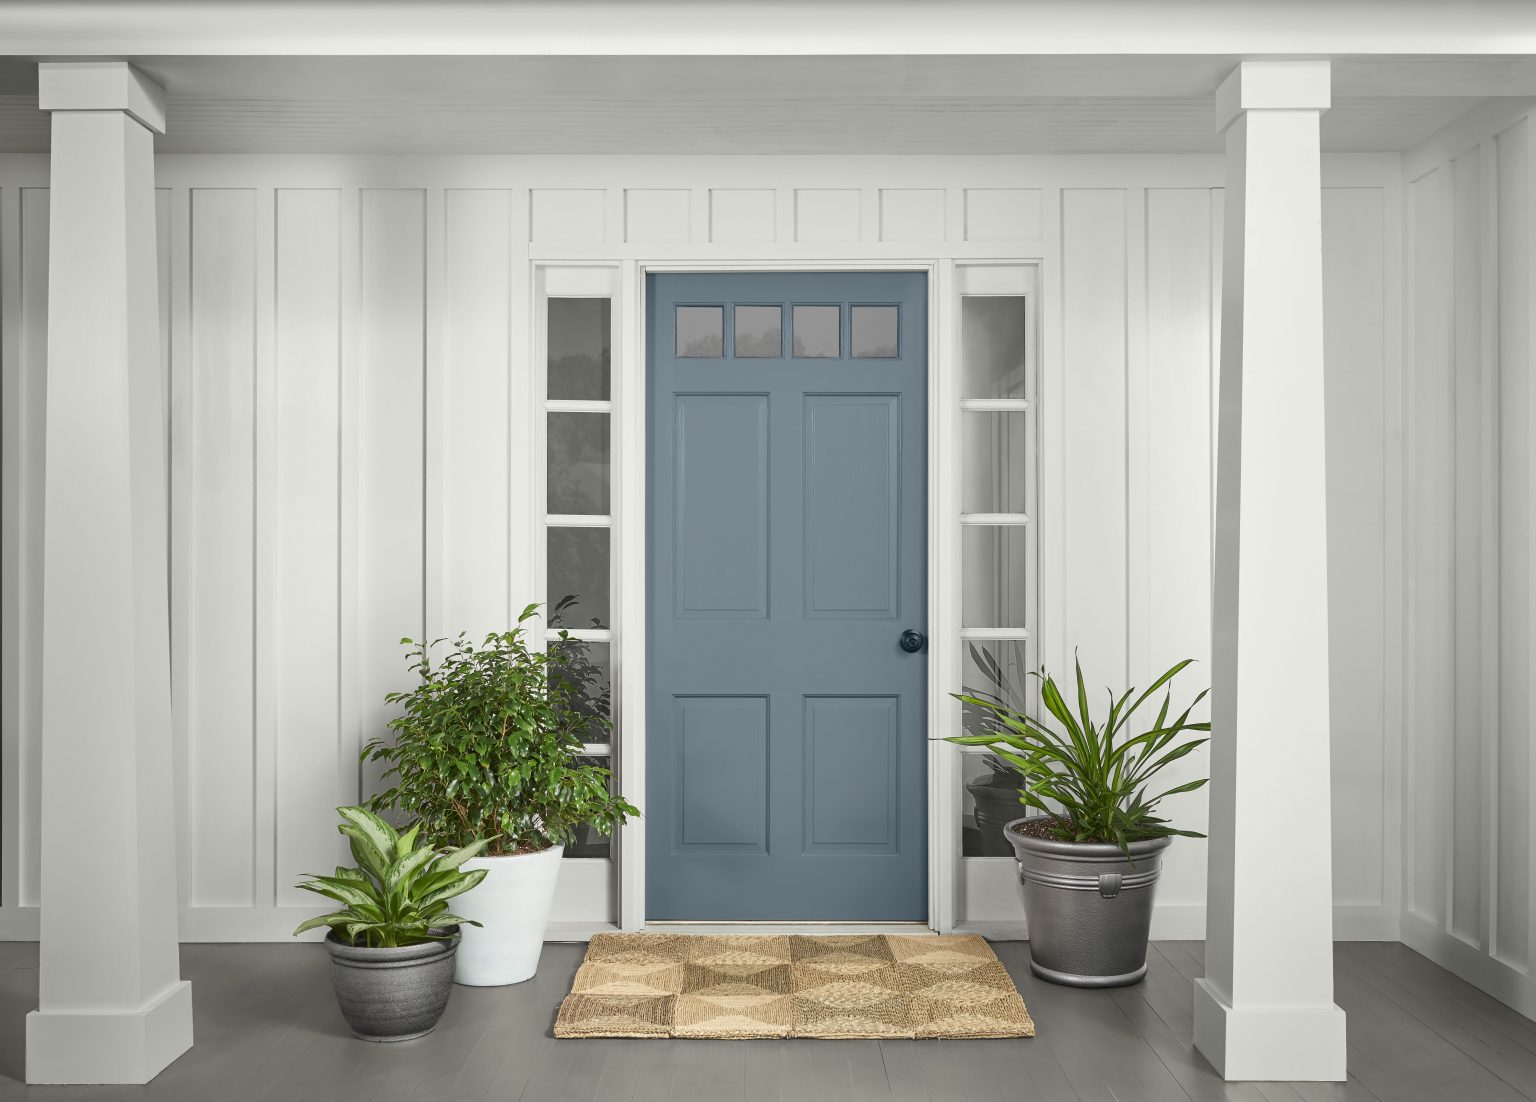 An exterior front door painted in Adirondack Blue, contrasting with the surrounding white walls